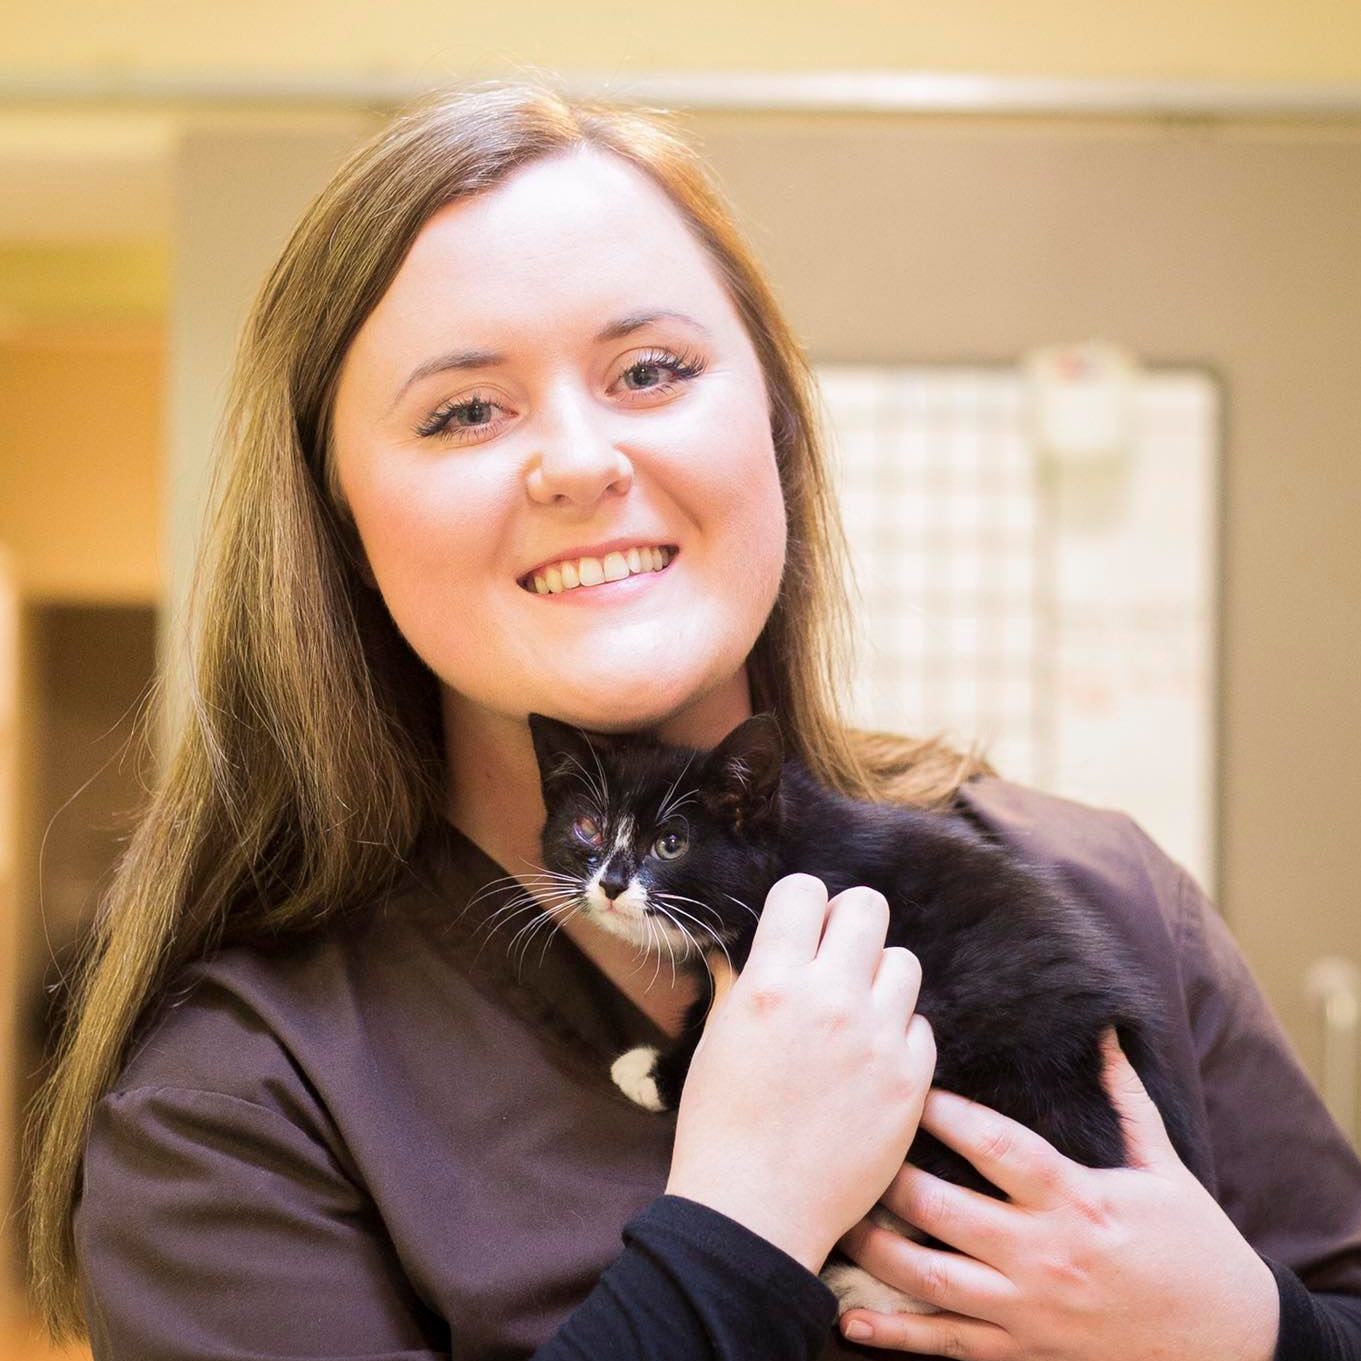 Dr Aisling O'Keeffe holding a cat - Aisling is a qualified vet working as an animal writer at The Veterinary Content Company. She specialises in proofreading and writing cat content.